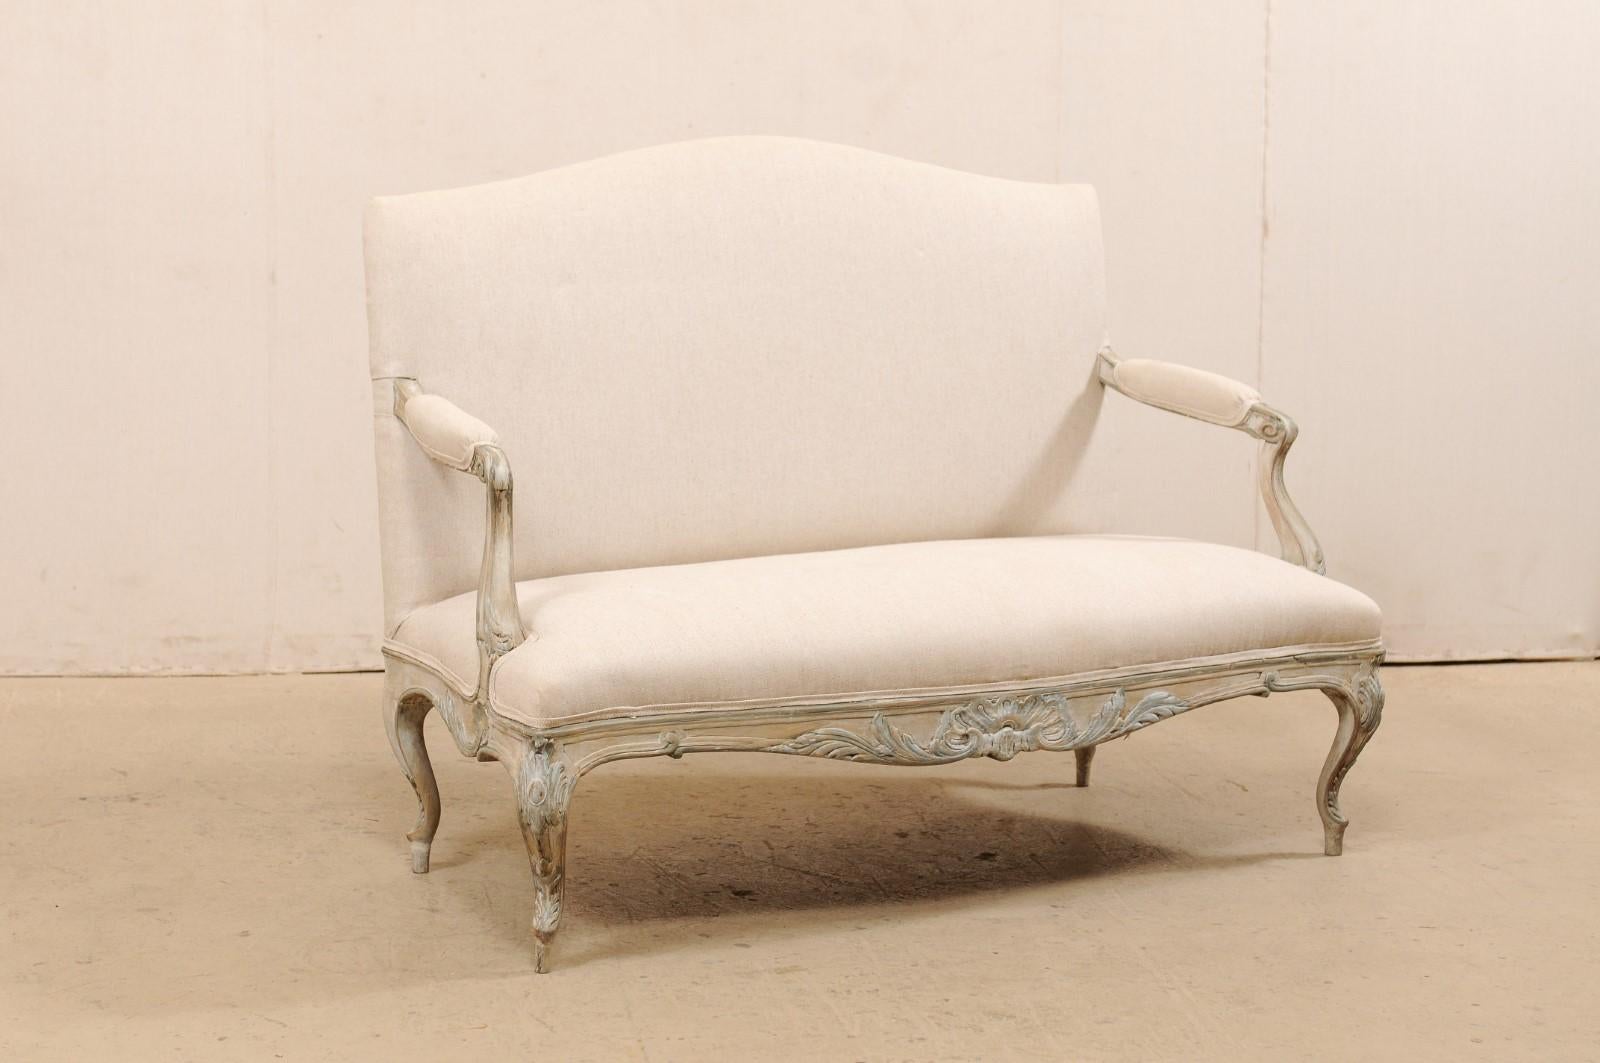 A French Louis XV style sofa from the mid-19th century. This antique settee from France upholstered features a gently arched top rail at back, carved acanthus leaves decorated the skirt and legs, with a scalloped skirt with foliage and shell decor